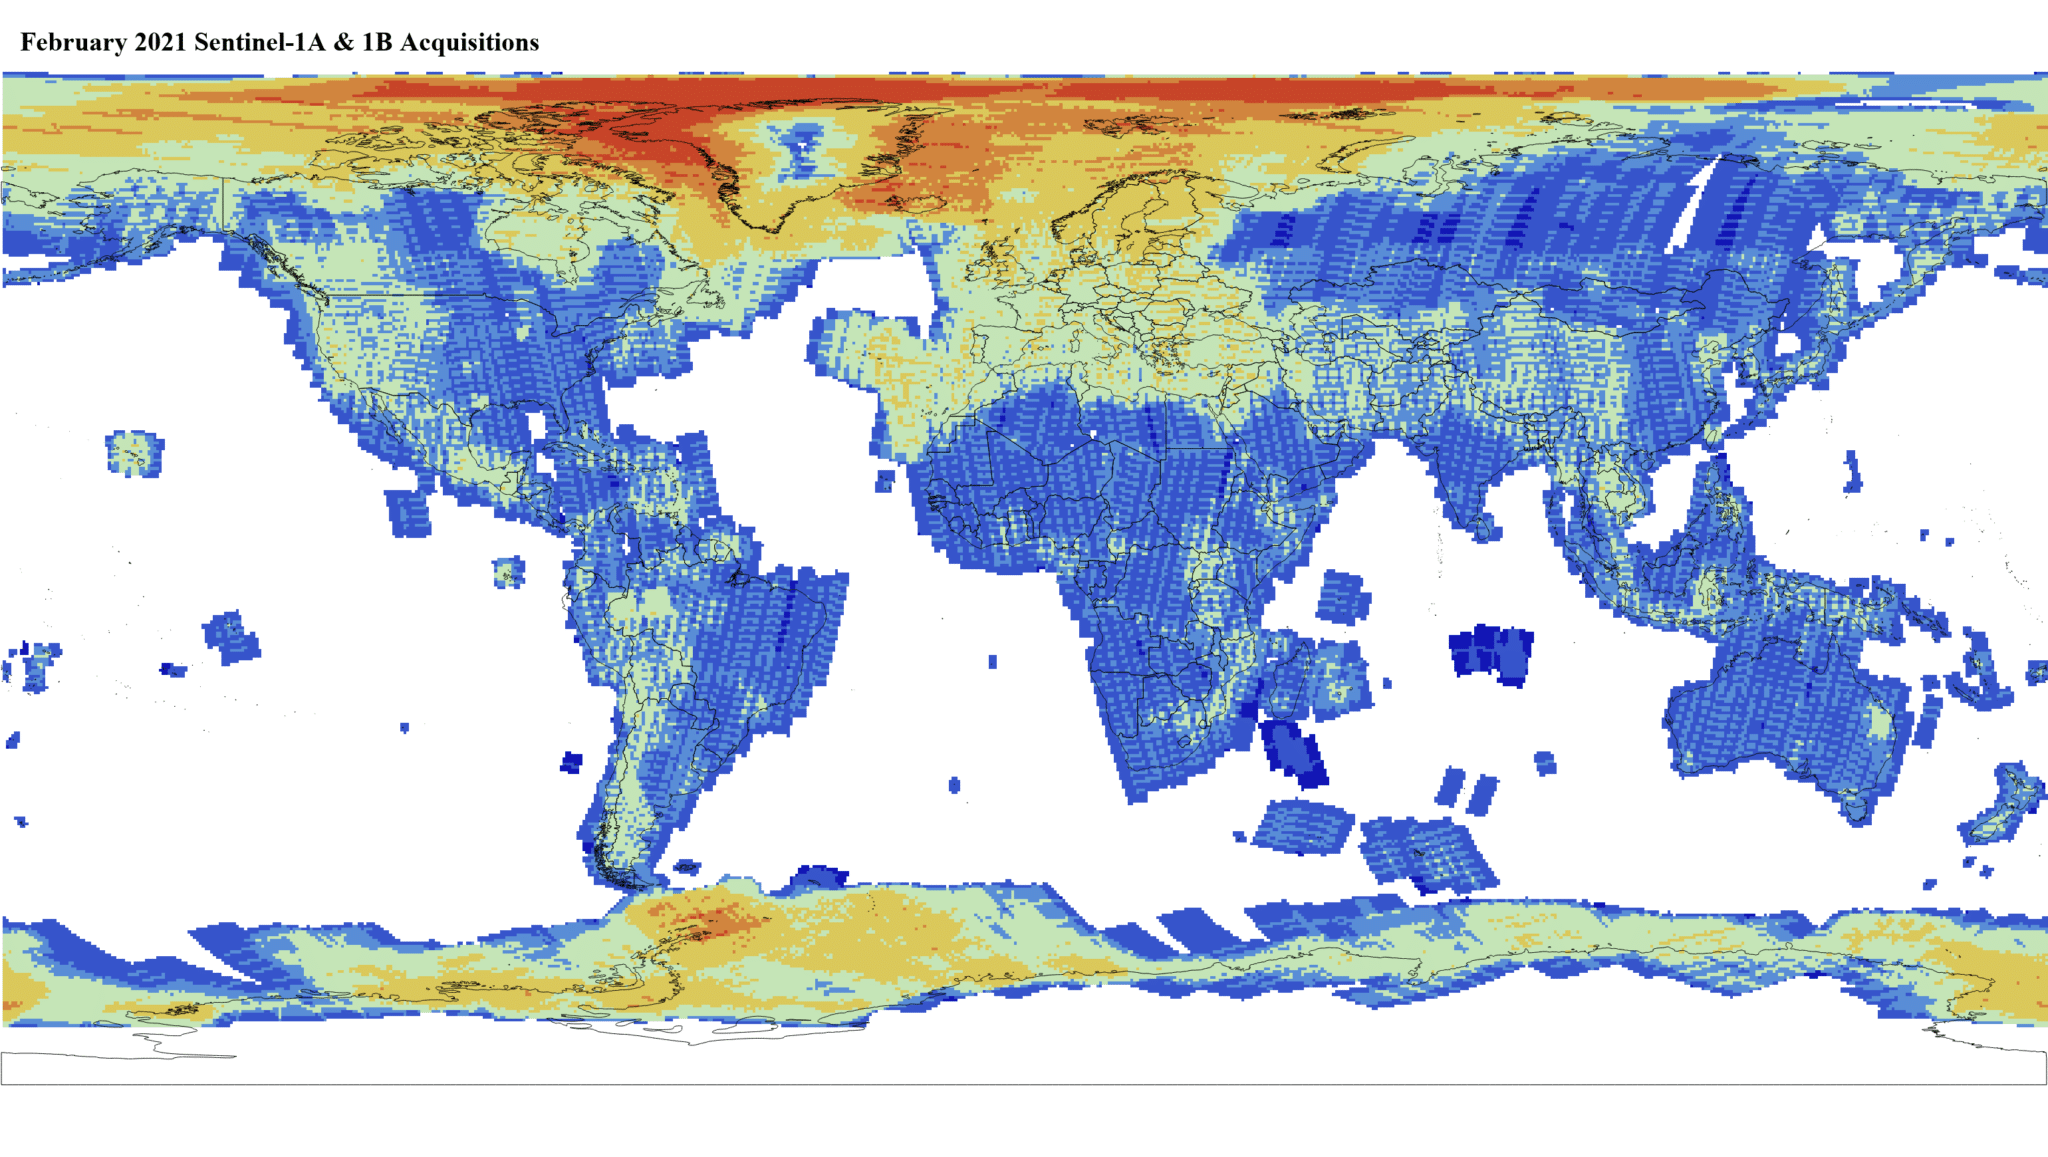 Heat map of Sentinel-1A and -1B GRD global acquisitions February 2021